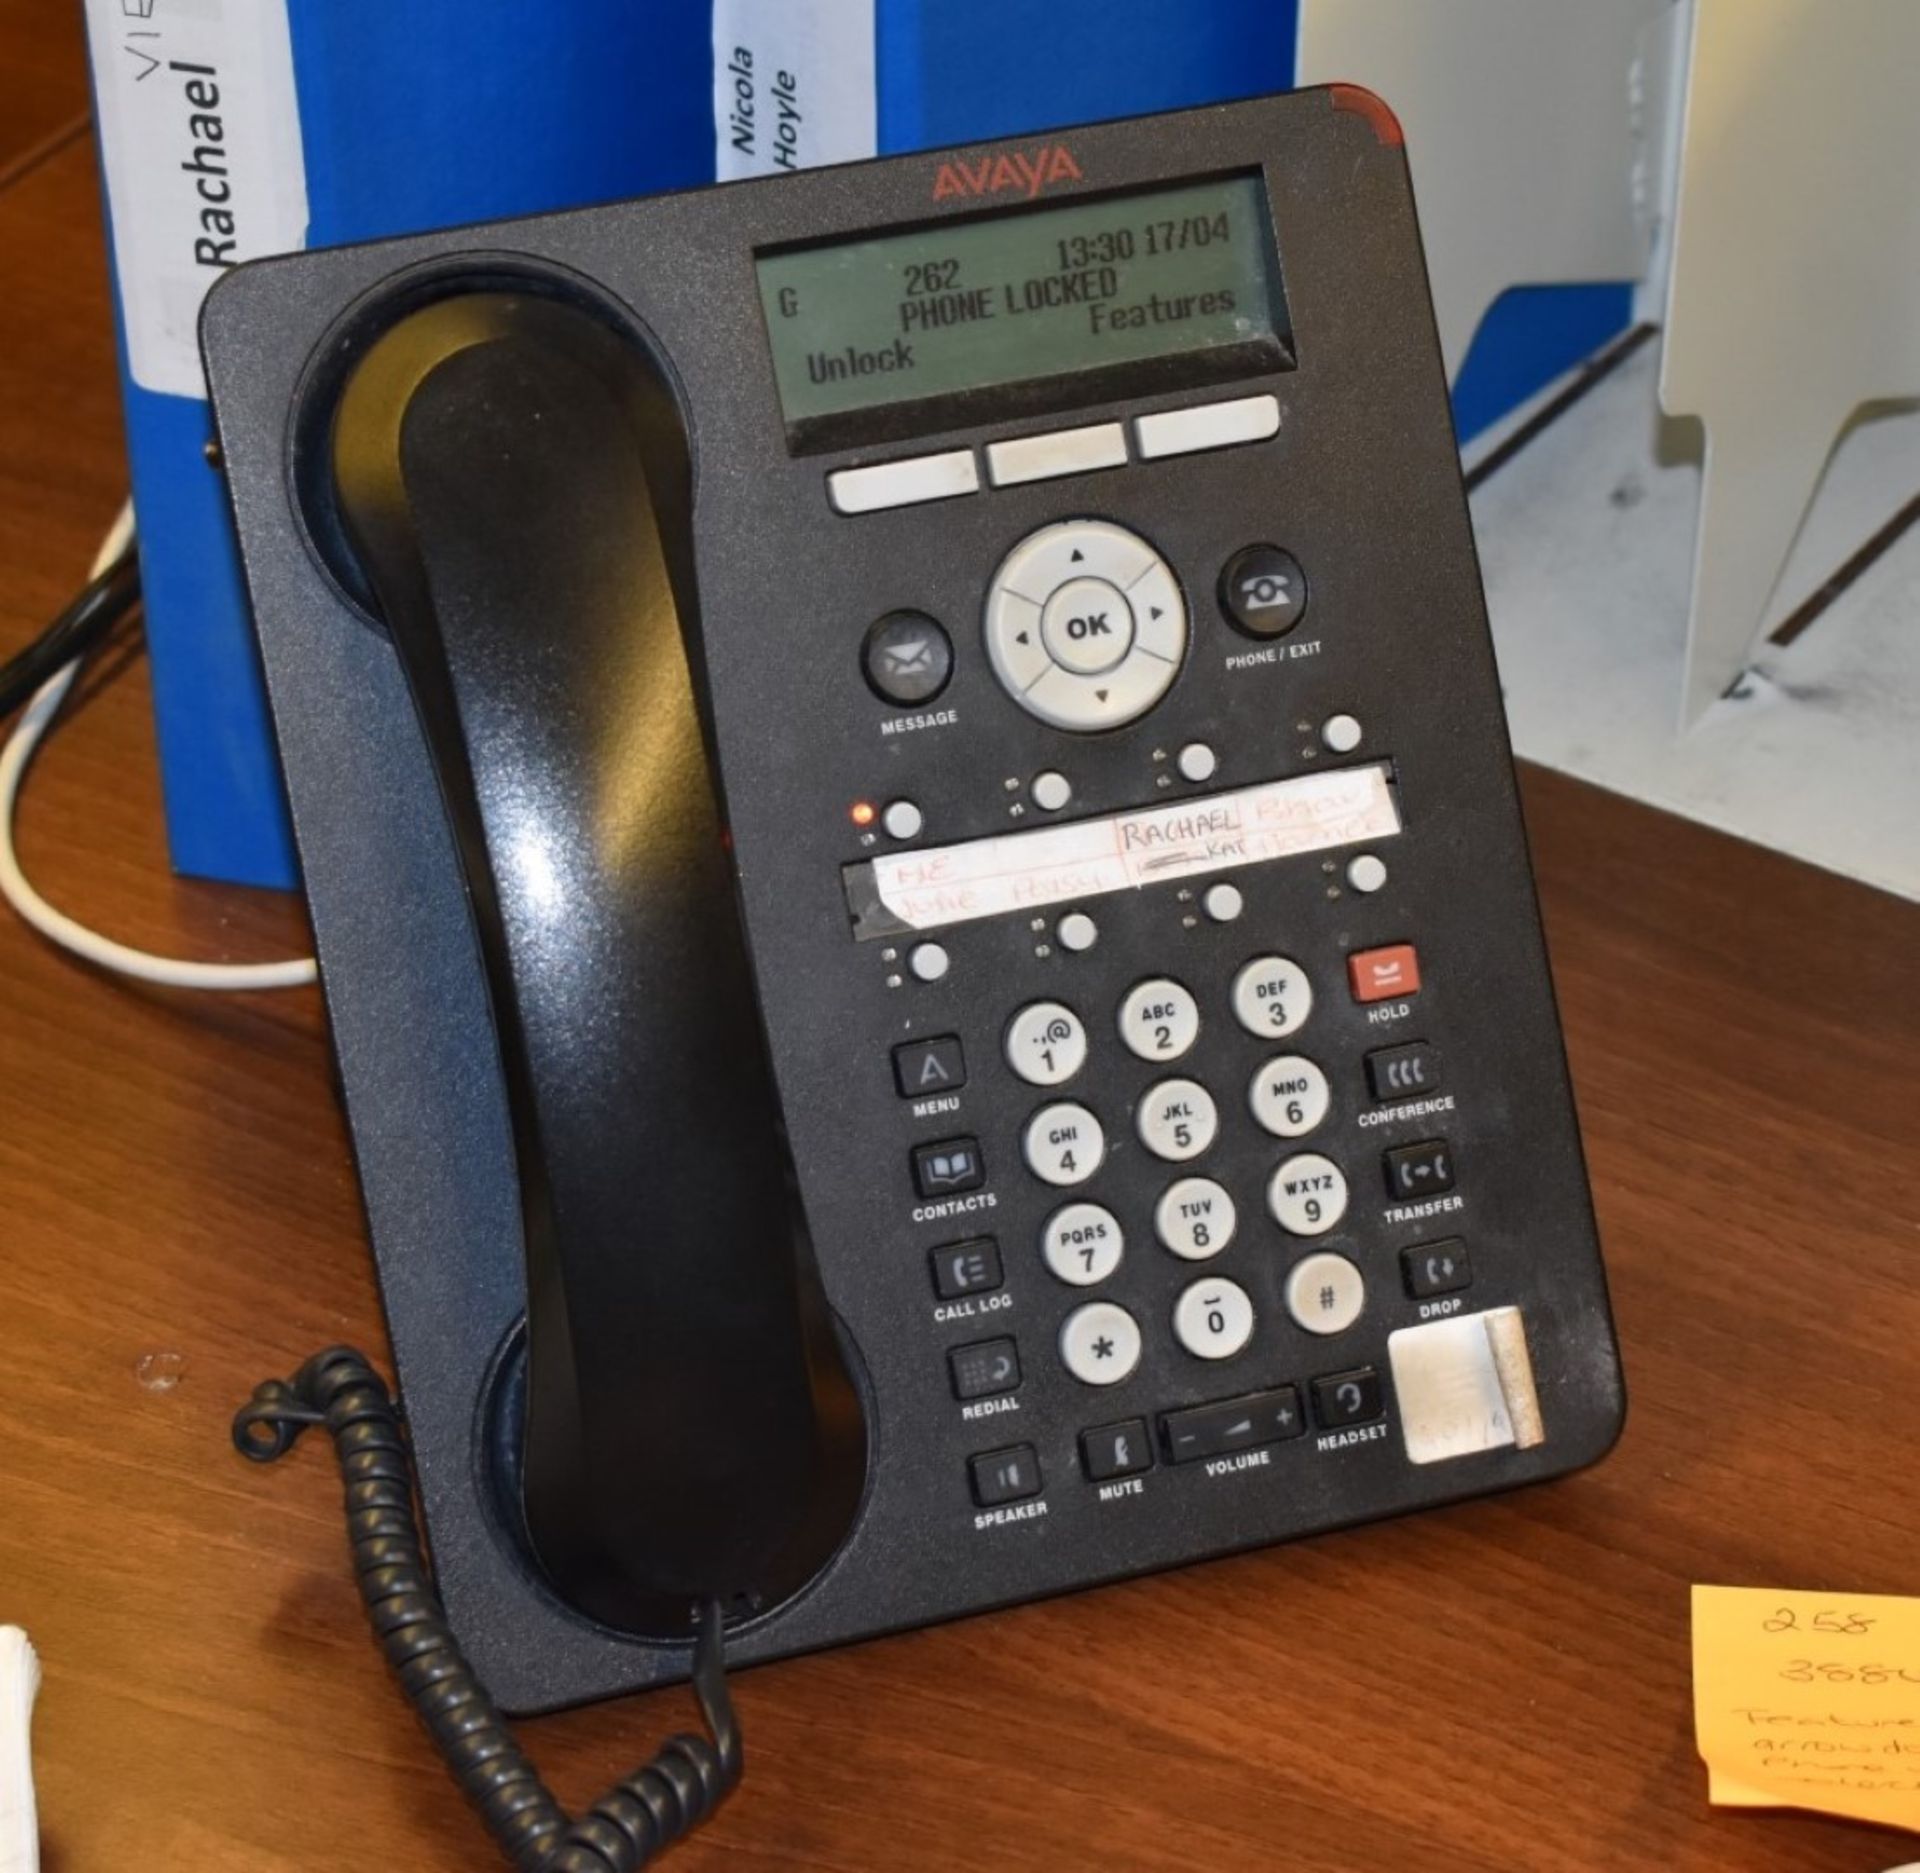 1 x Avaya IP500 V2 IP IP VOID Business Telephone System With 4 x Combi Cards and 9 x Phone Handsets - Image 10 of 15